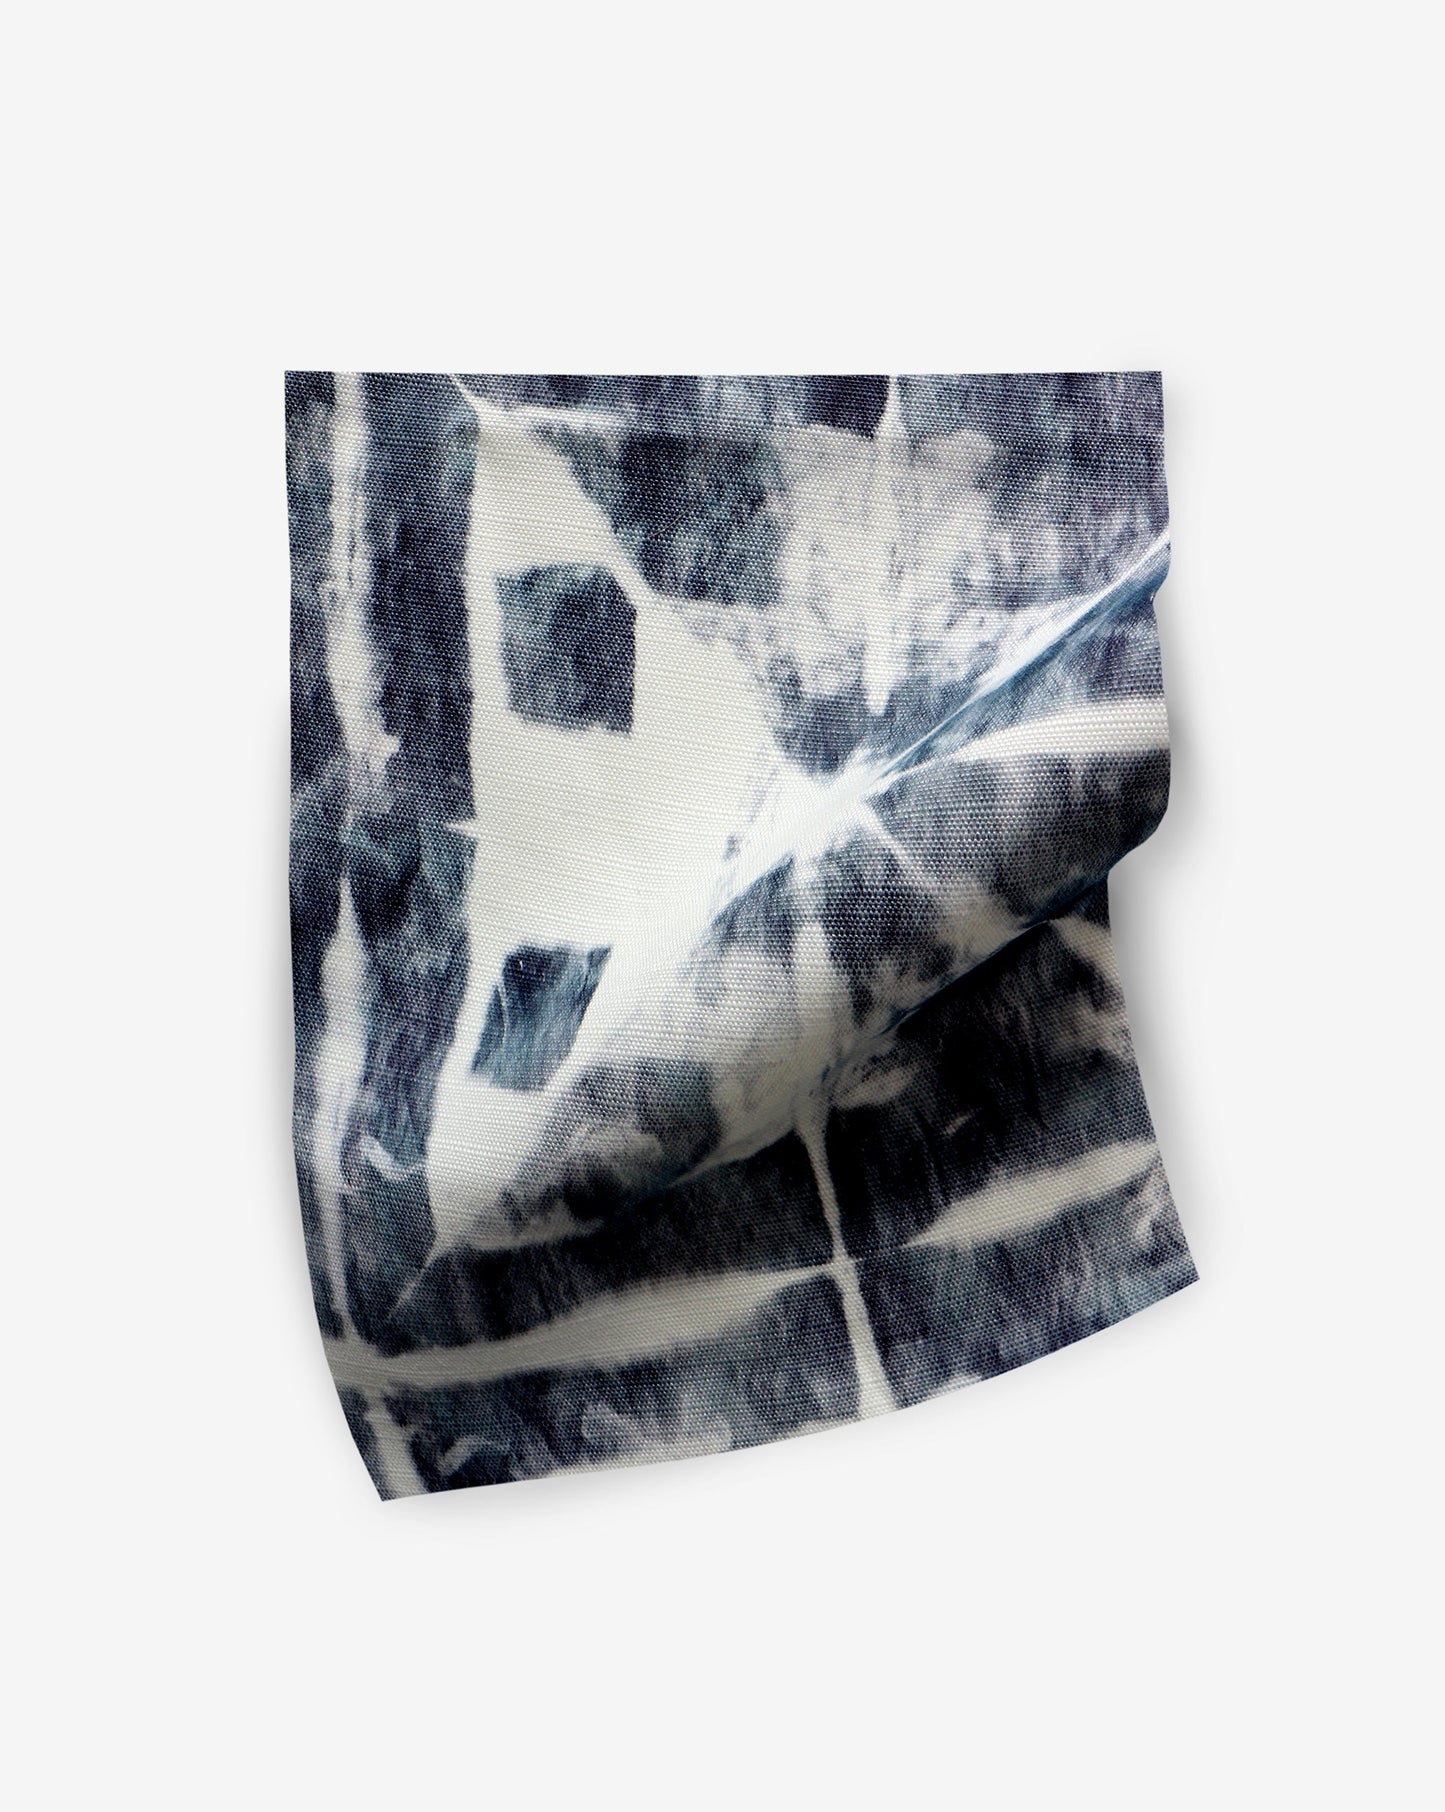 A piece of Banda Performance Fabric Midnight with a blue and white pattern, perfect for a Banda or Eskayel favorite